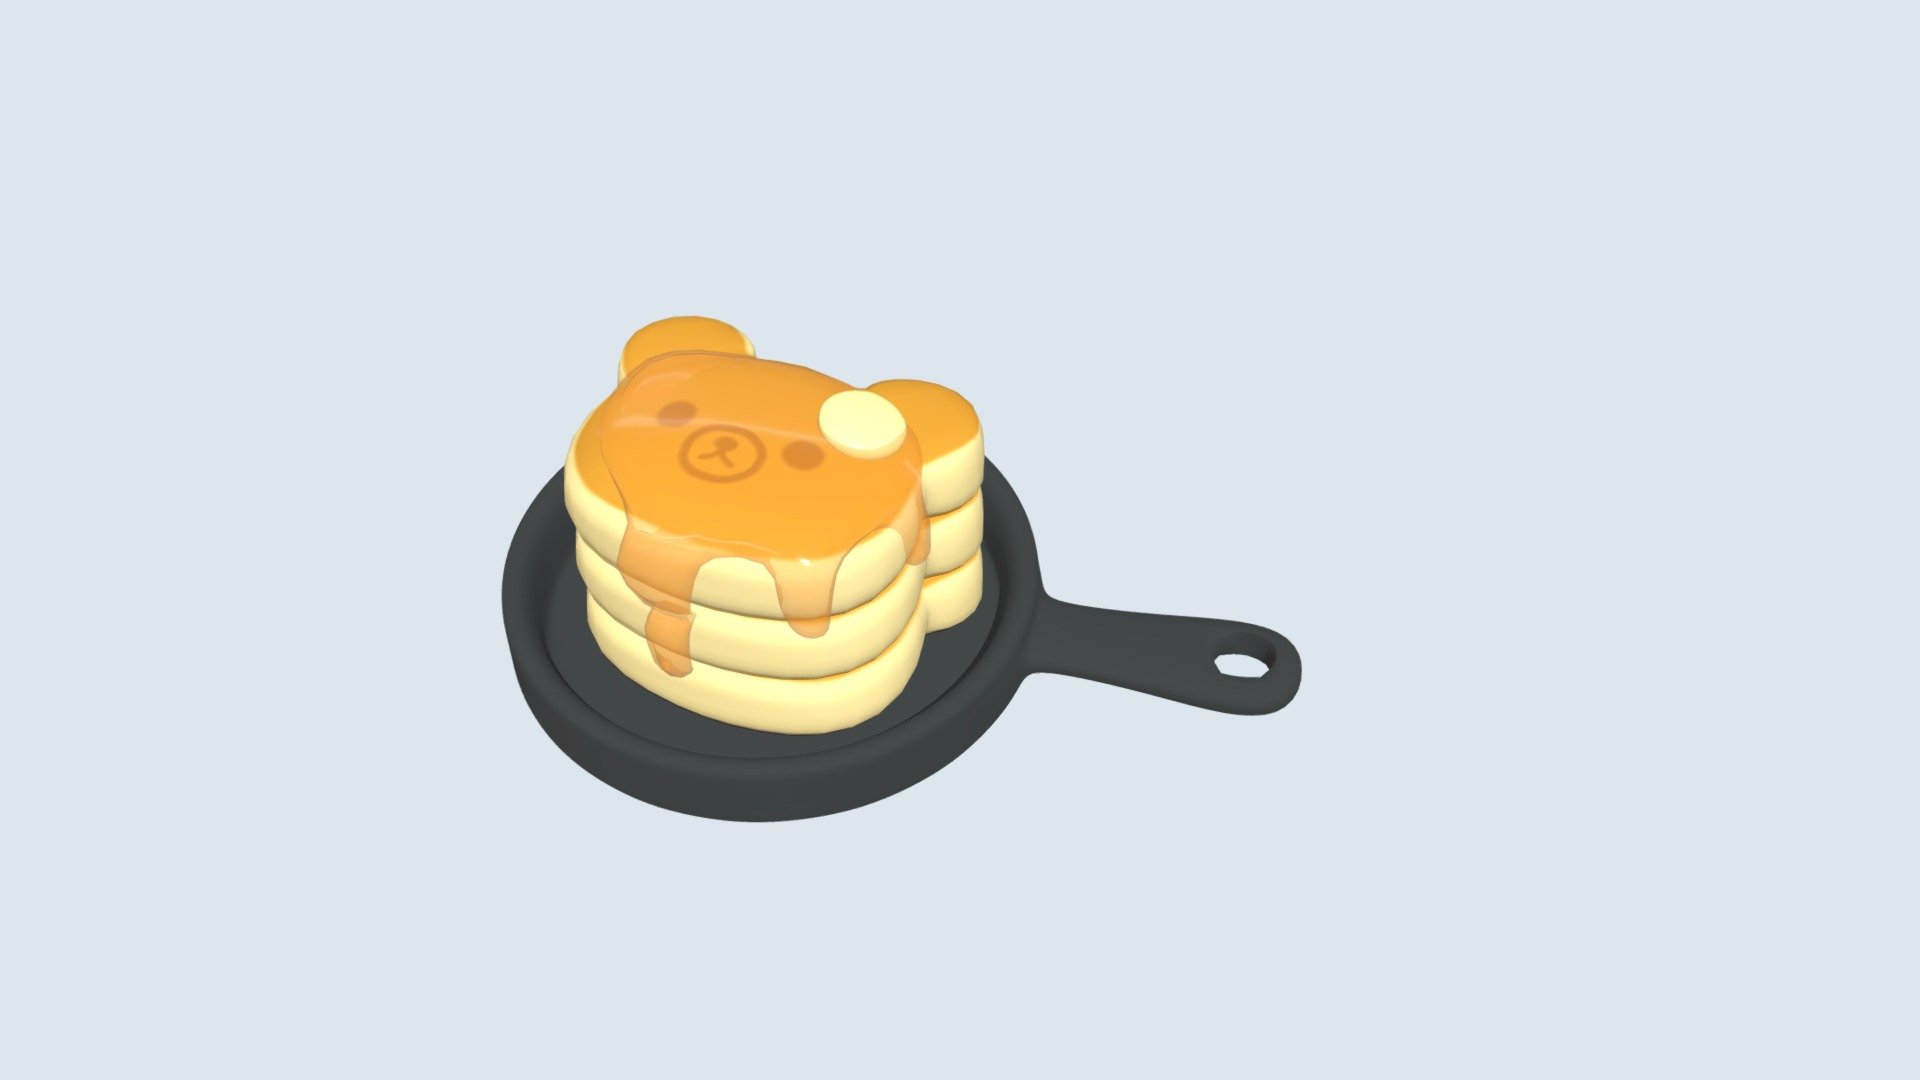 I came across a picture of Rilakkuma pancake while web surfing and wanted to model it.
This was very fun to make and I really love how the render turned out! - Rilakkuma Pancake - 3D model by Hay Lee (@hayleeee) 3d model